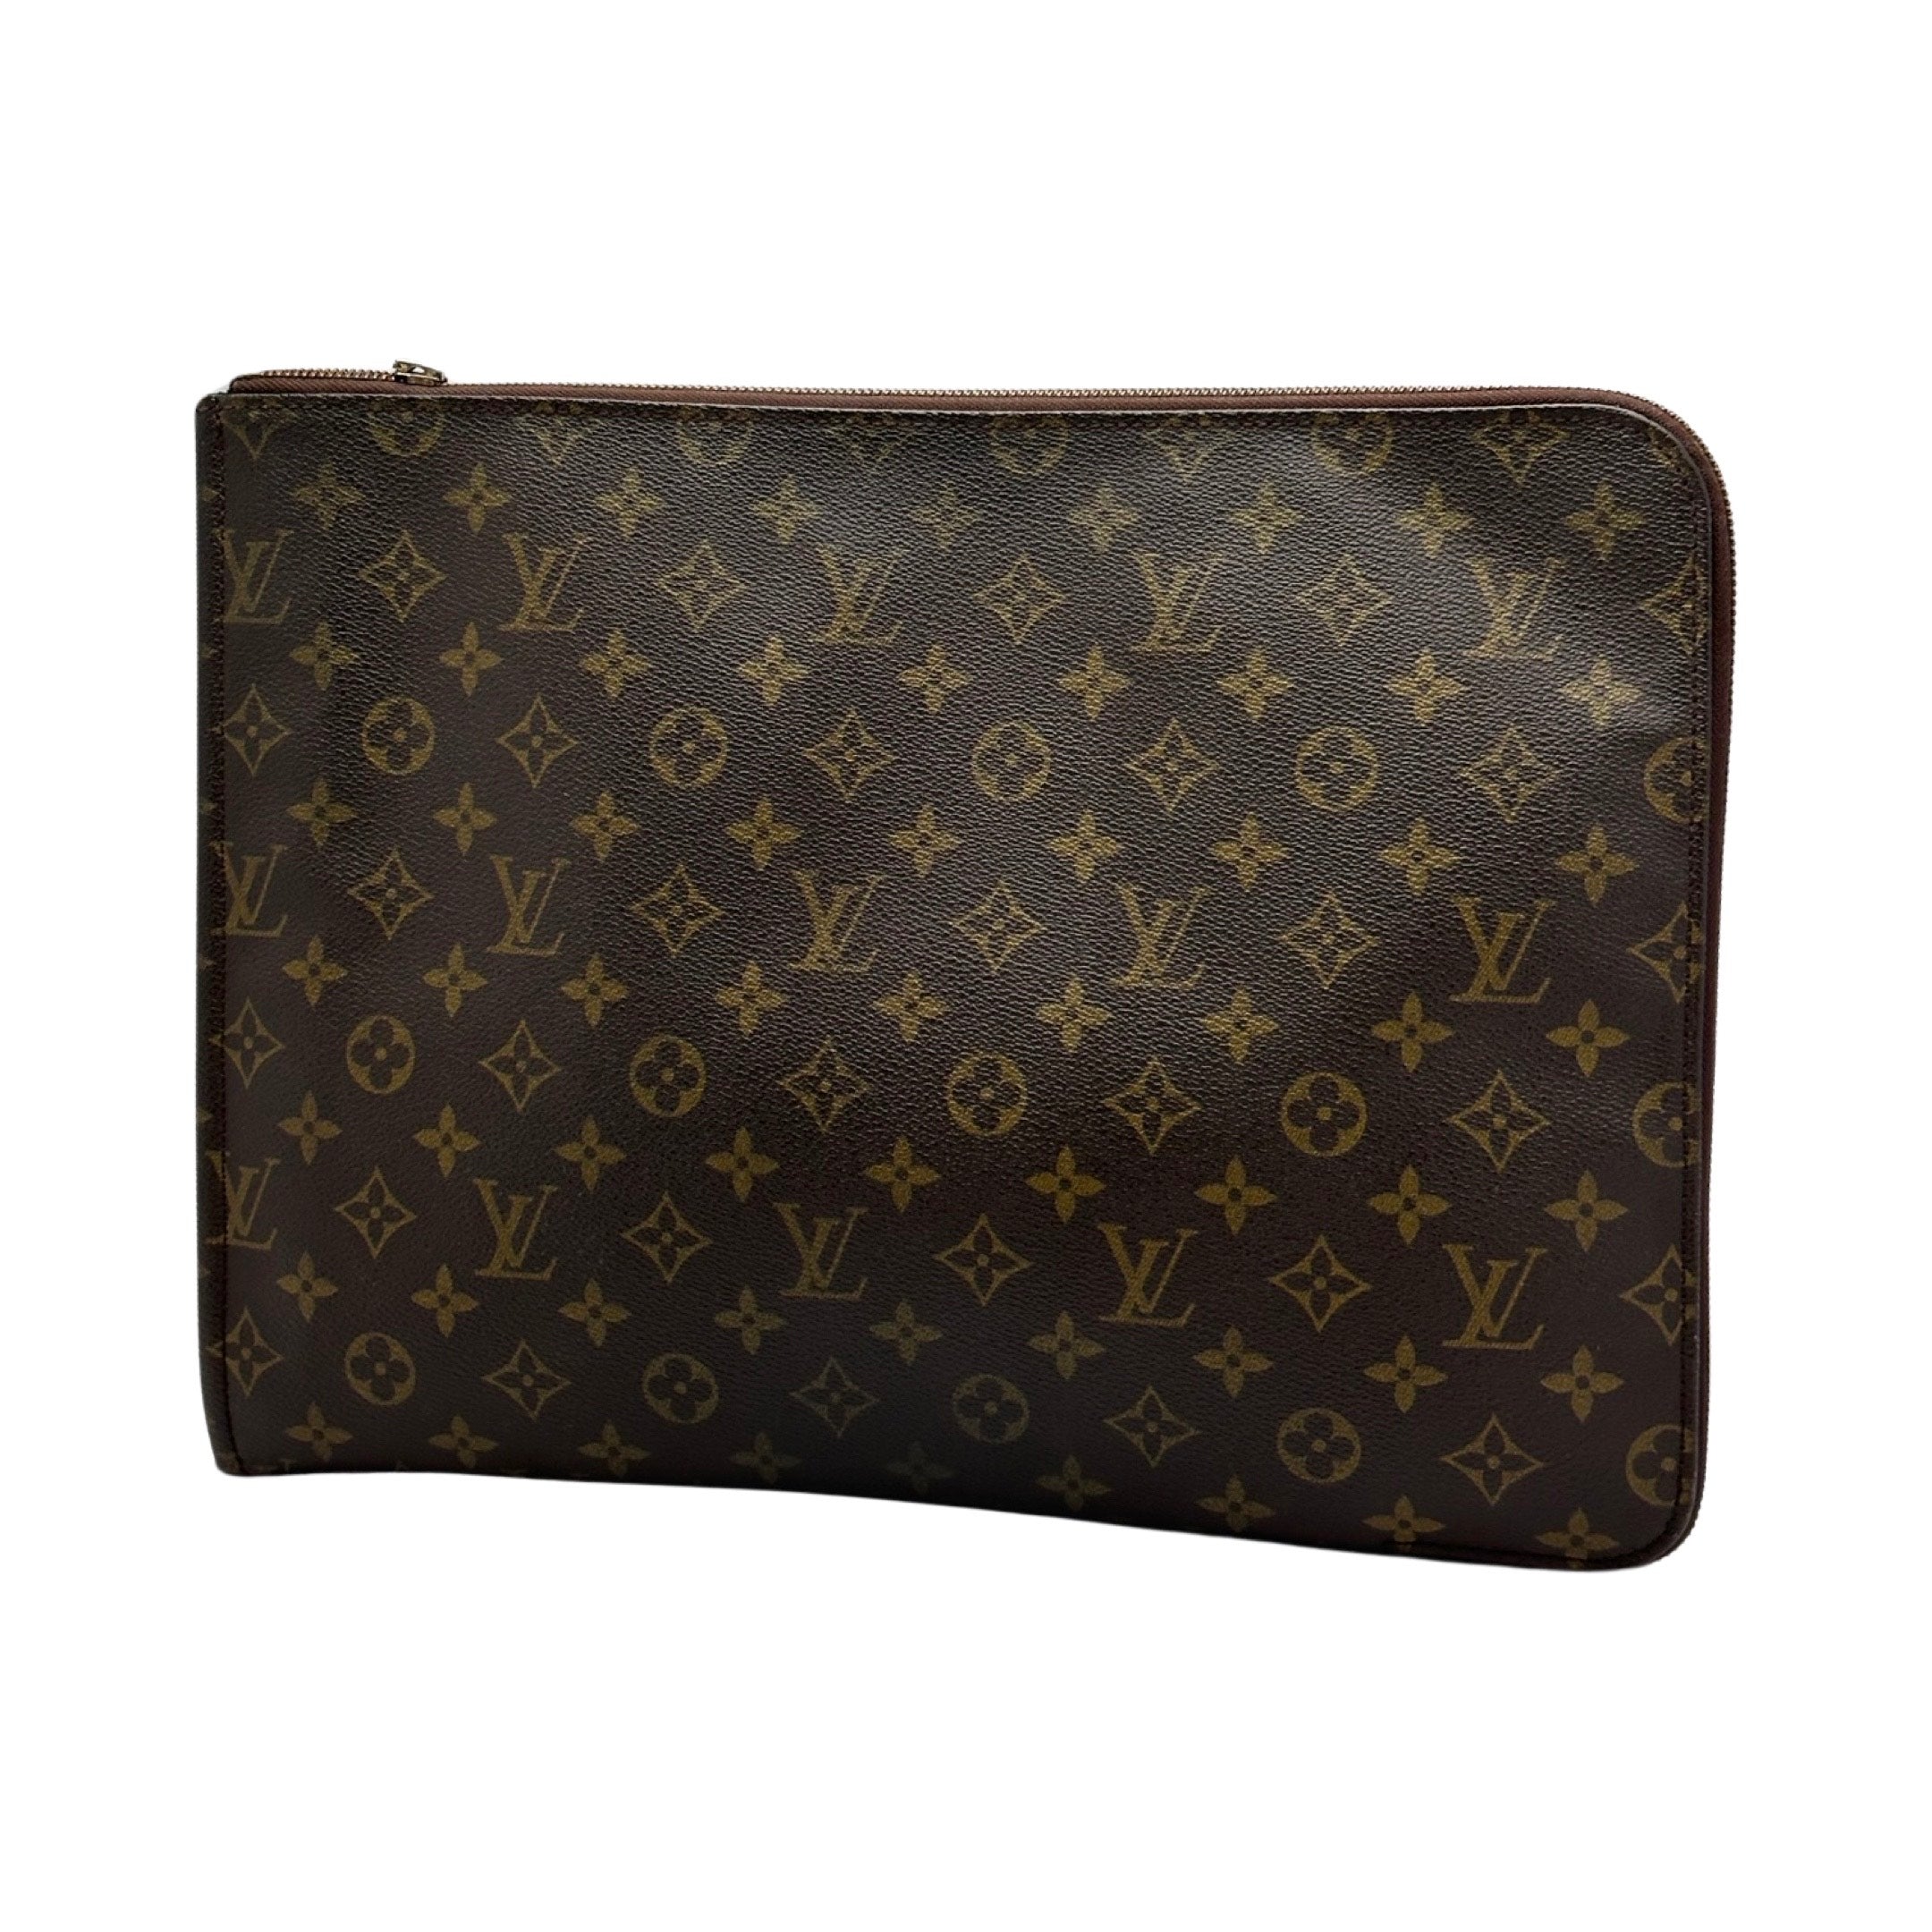 Louis Vuitton - Authenticated Pochette Trunk Clutch Bag - Cloth Brown for Women, Very Good Condition